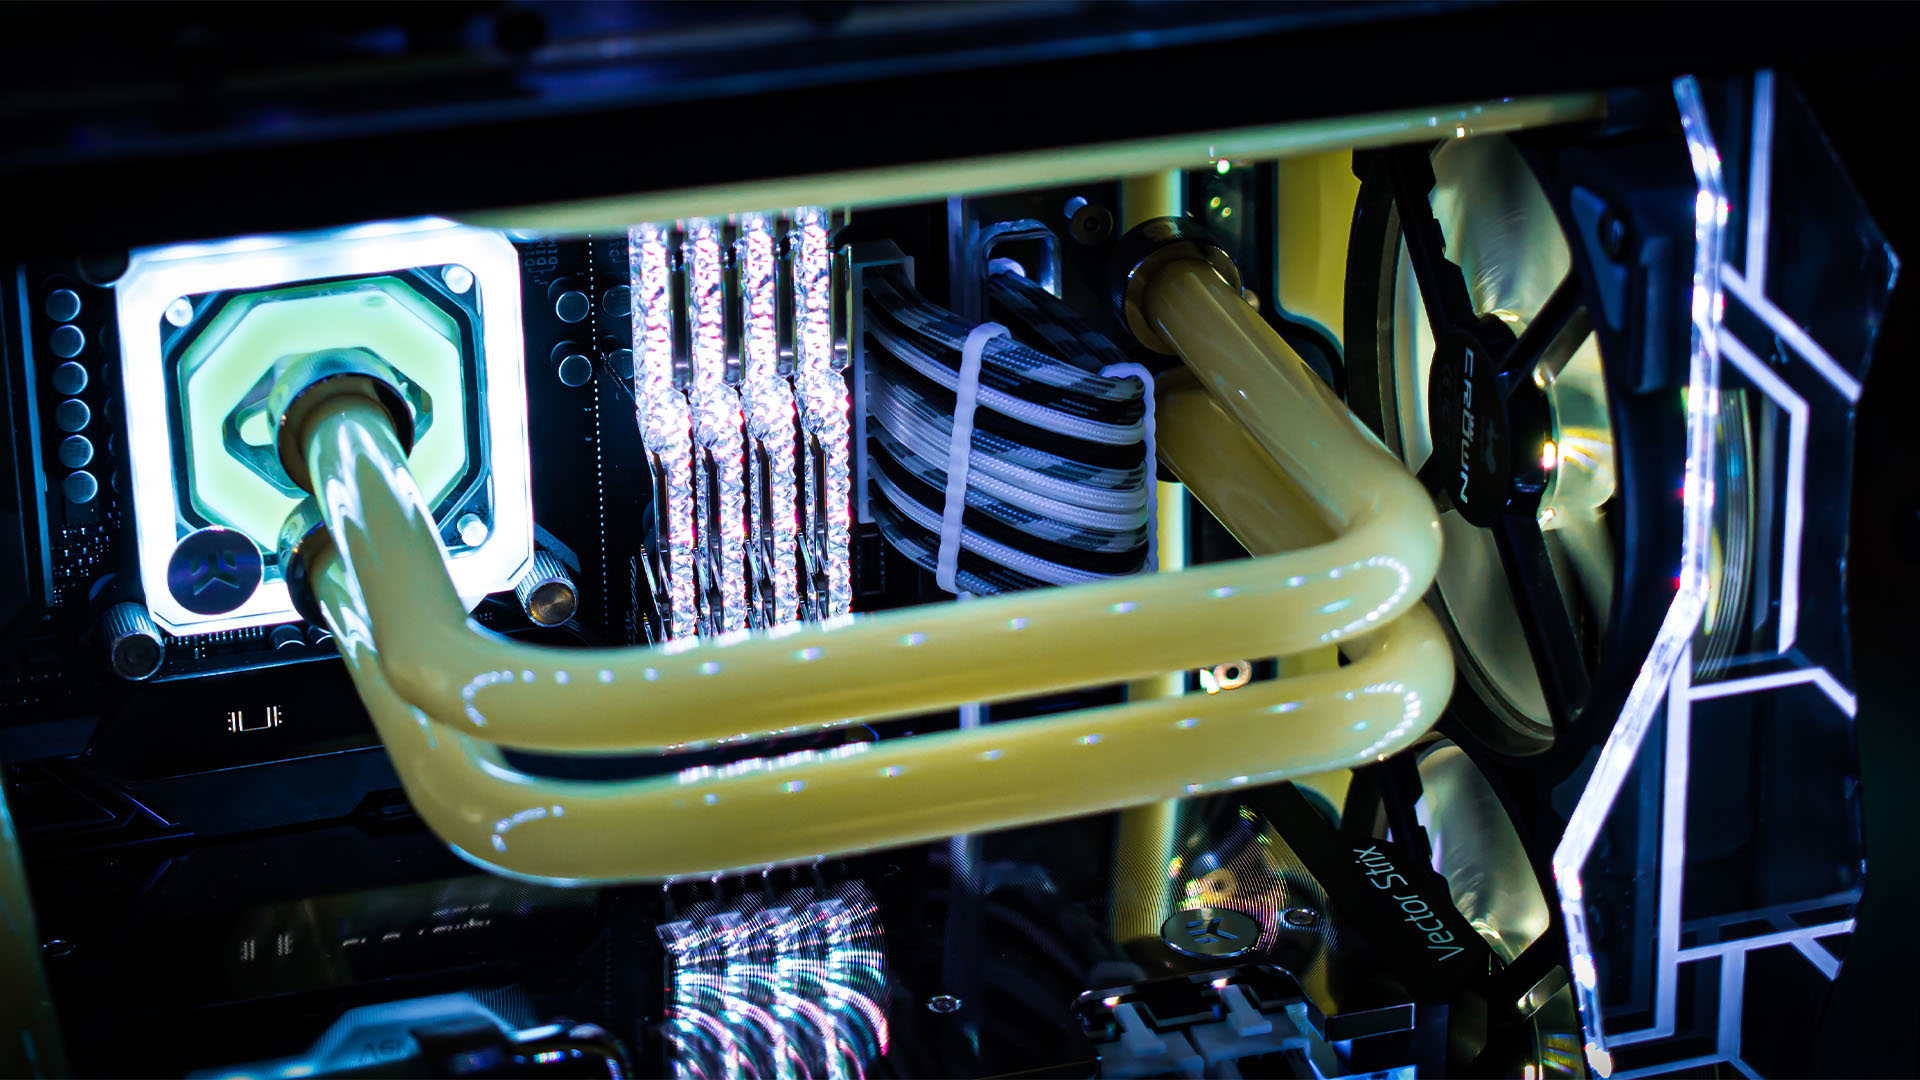 The yellow coolant runs through the watercooled gaming pc